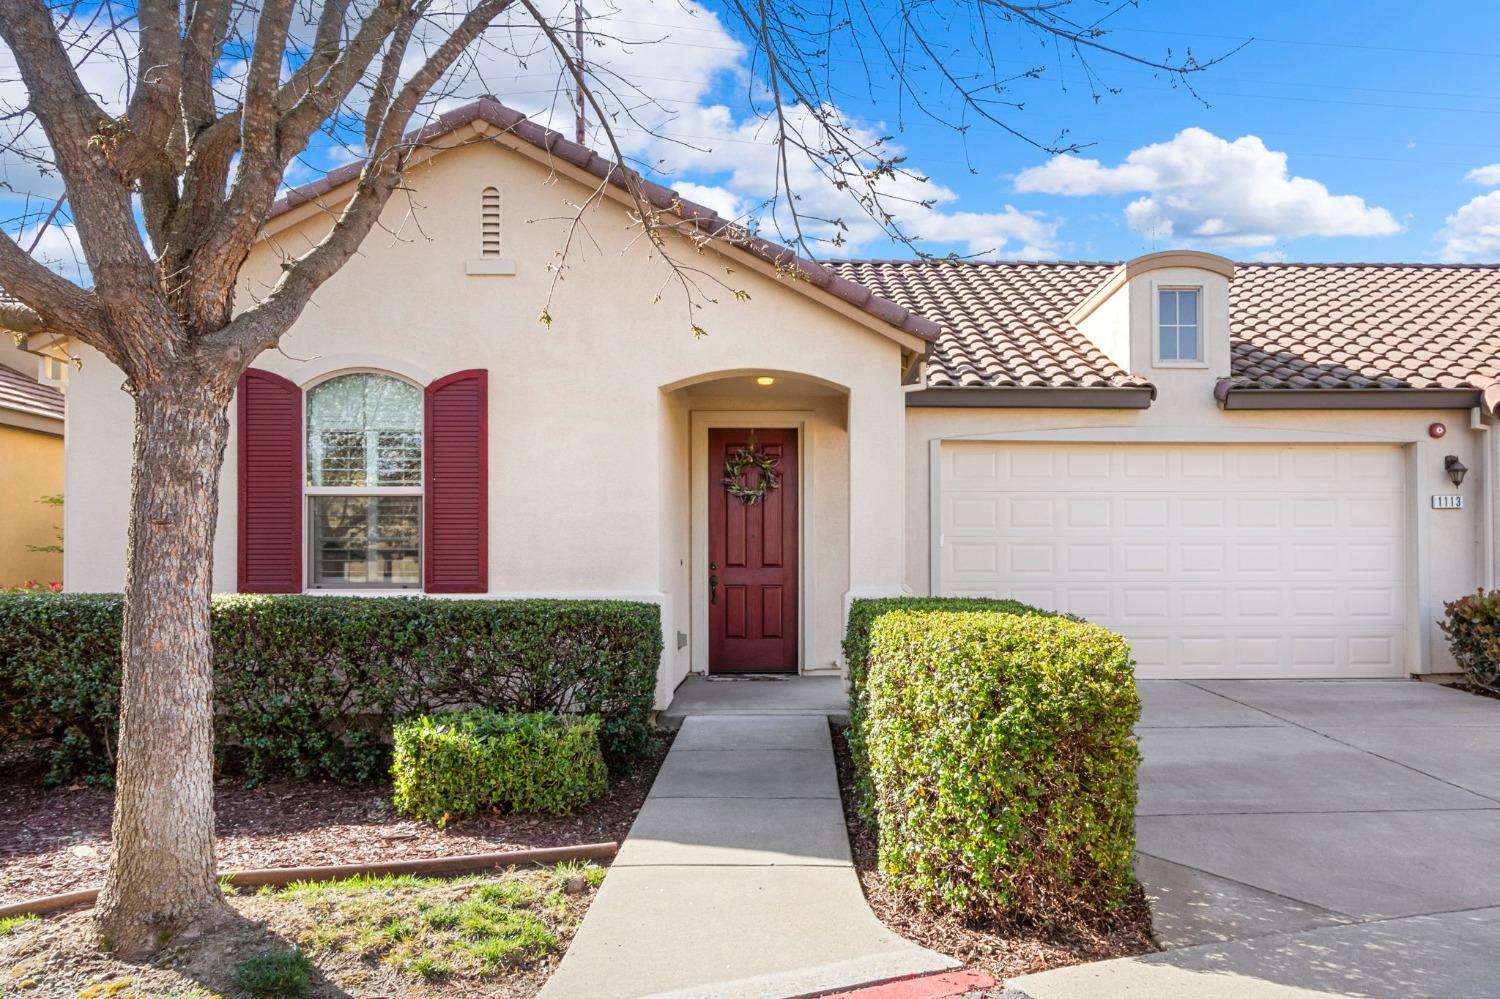 Photo of 1113 Marseille Ln in Roseville, CA